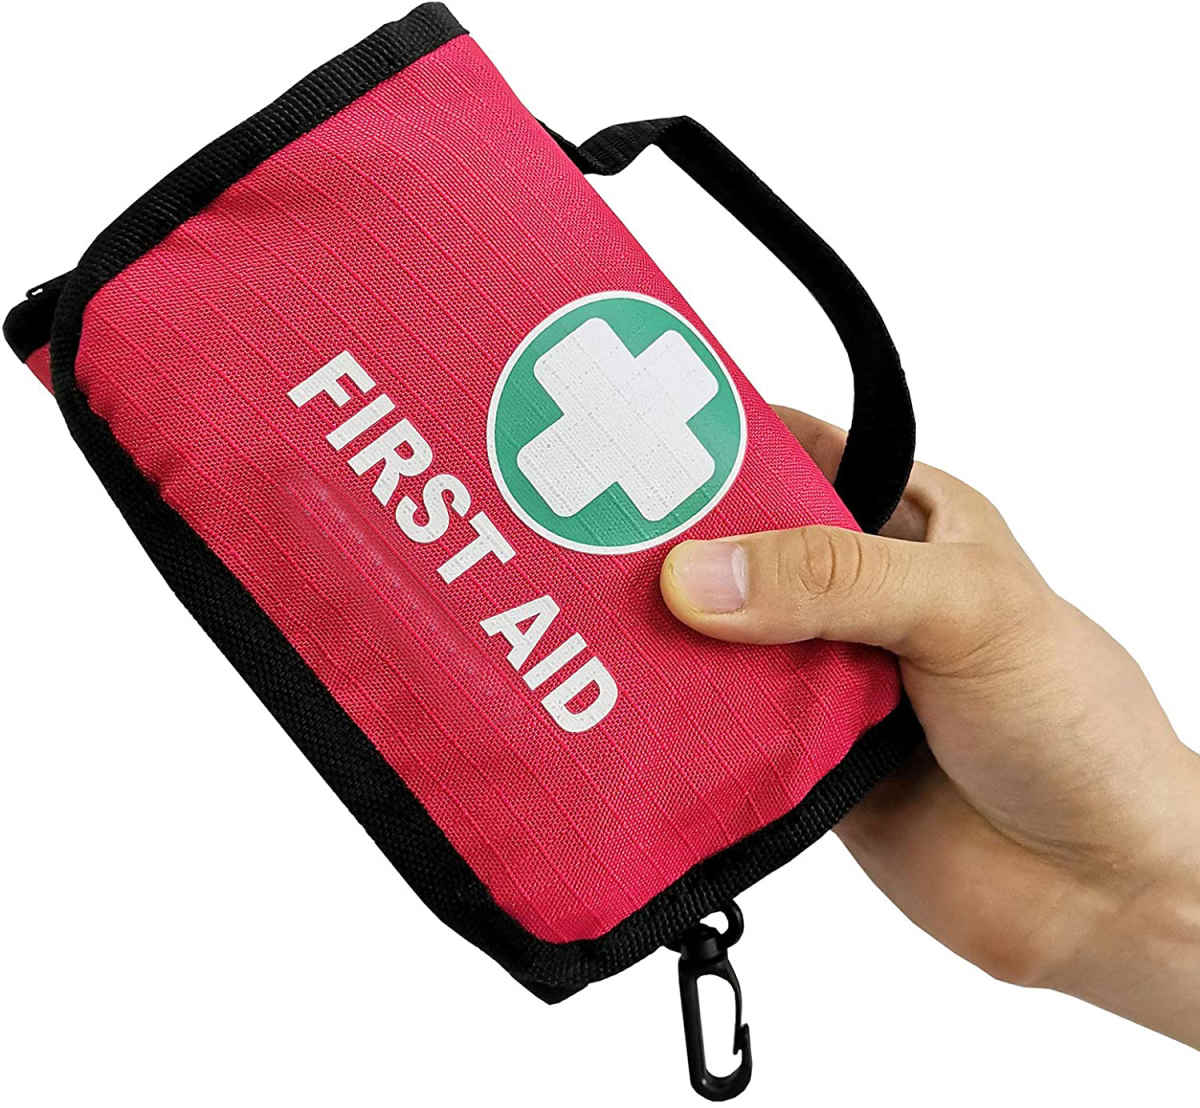 Advantages of Small First Aid Grab Bag